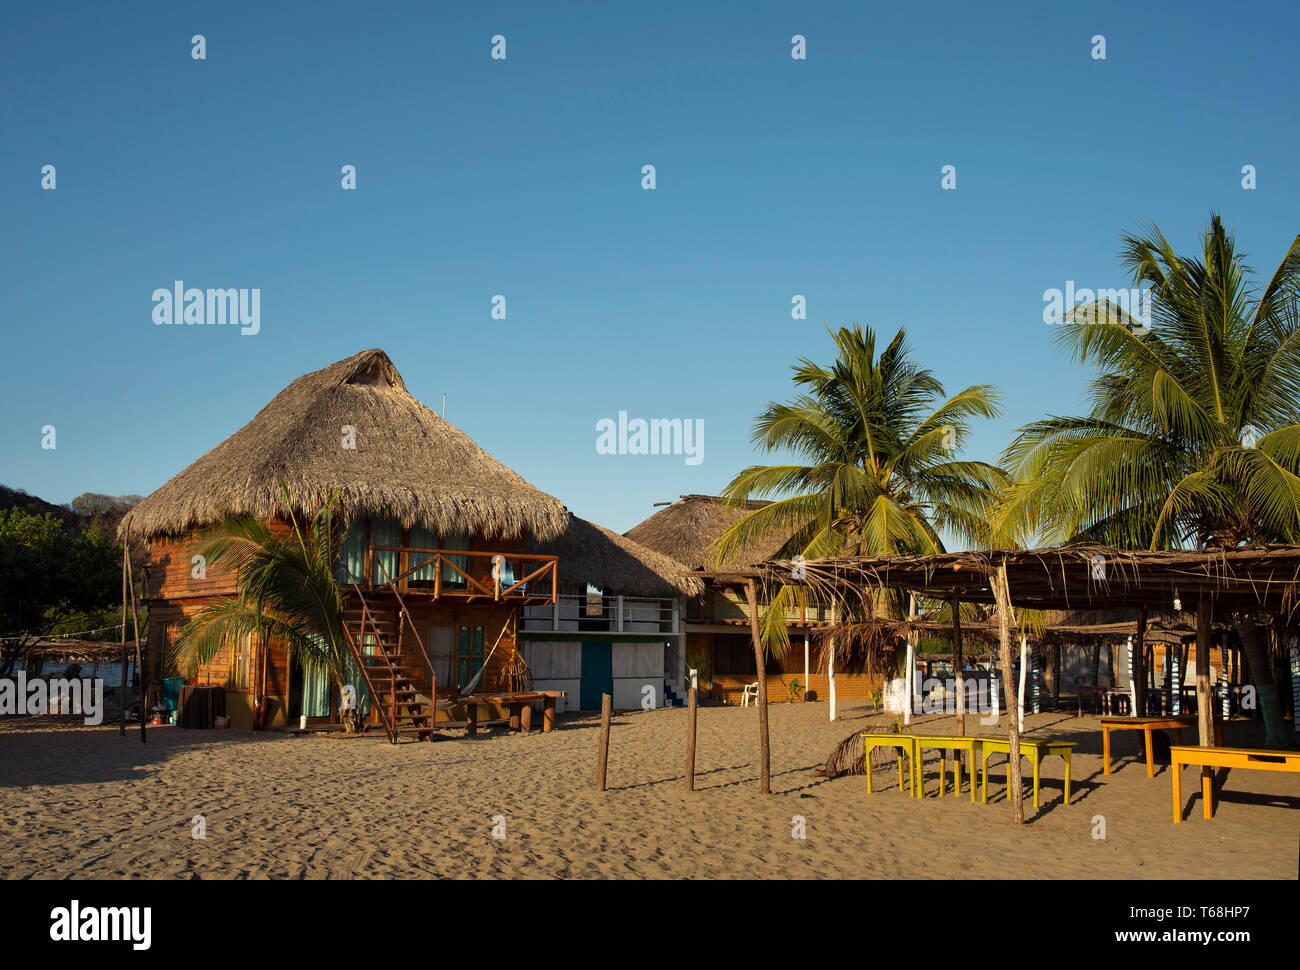 Thatched-roof bungalows for tourists lodgings on the beach Chacahua, Oaxaca State, Mexico. Apr 2019 Stock Photo